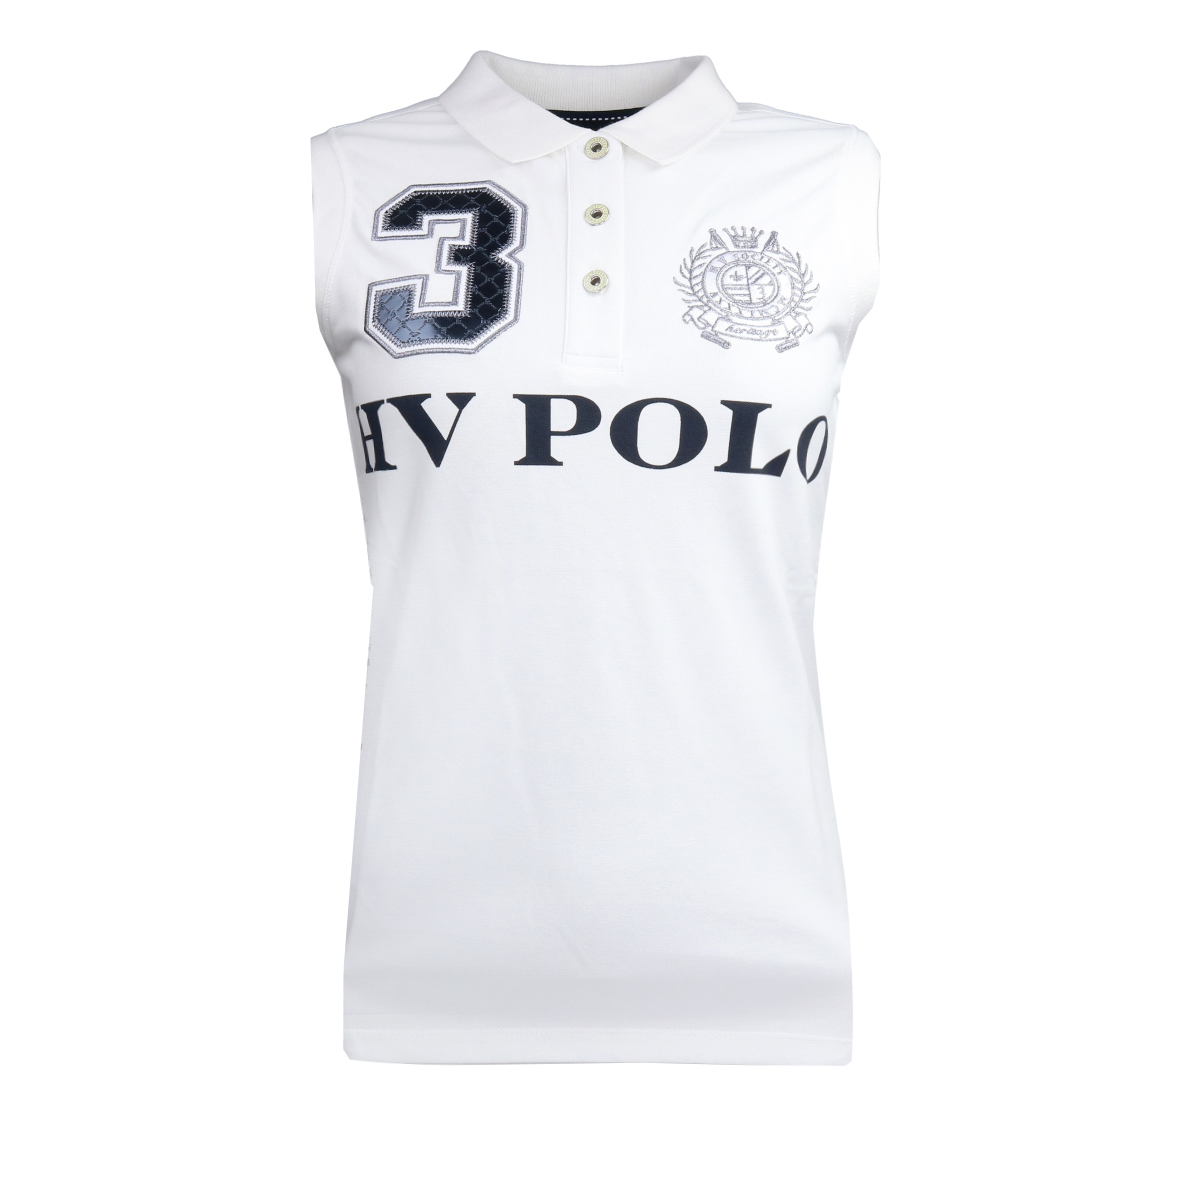 Polo Hv Polo Favouritas Luxury Mouwloos Wit, S in wit